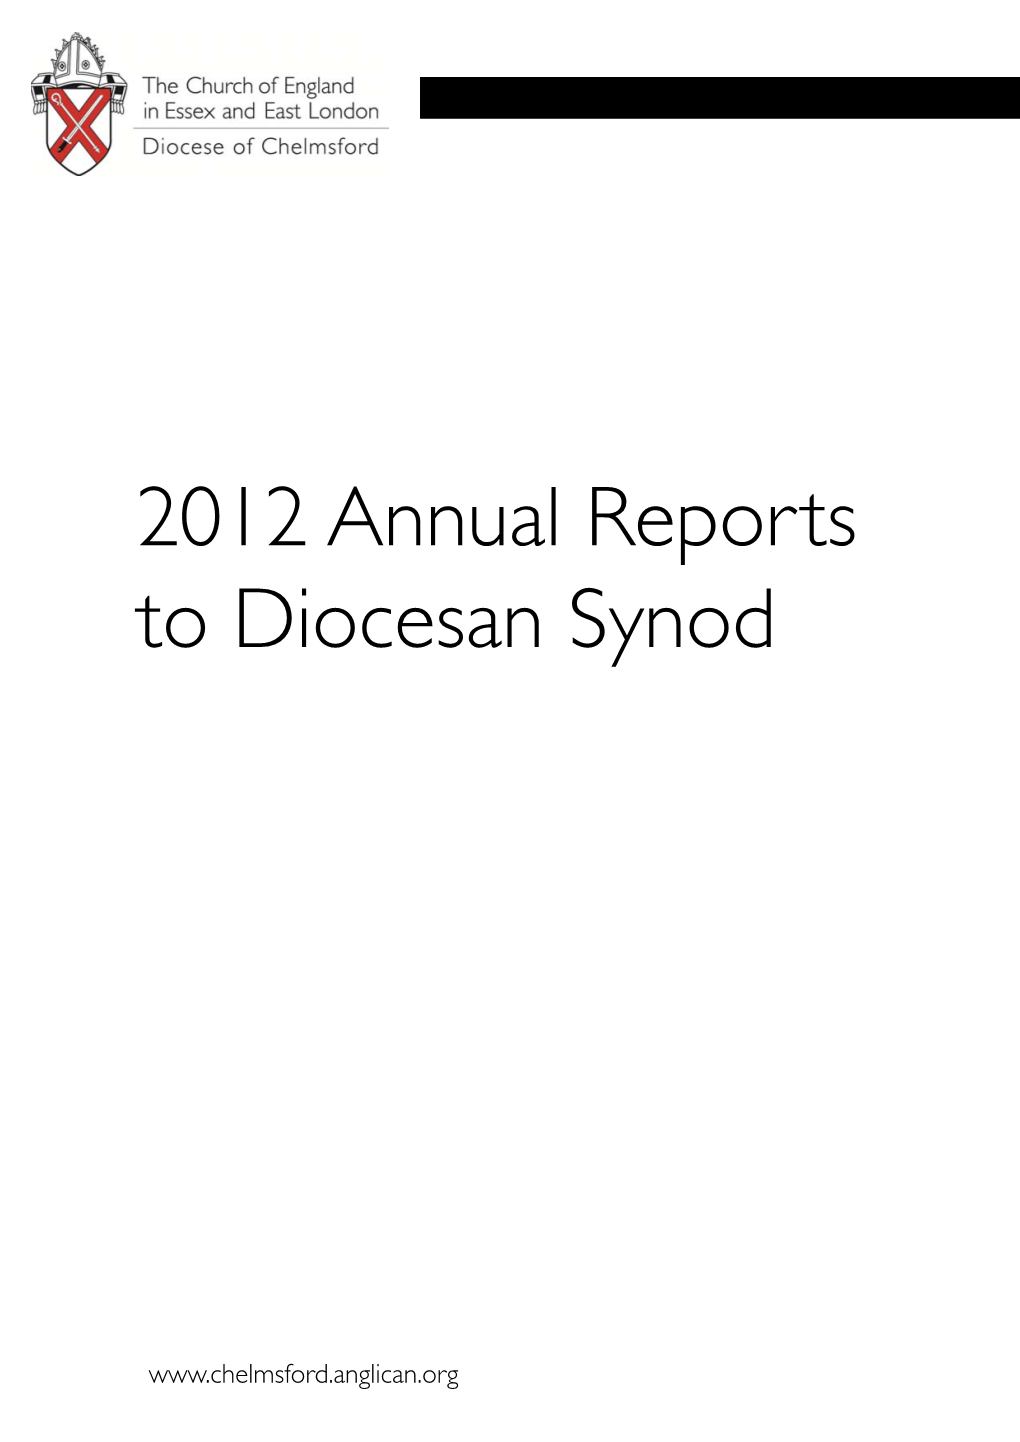 2012 Annual Reports to Diocesan Synod